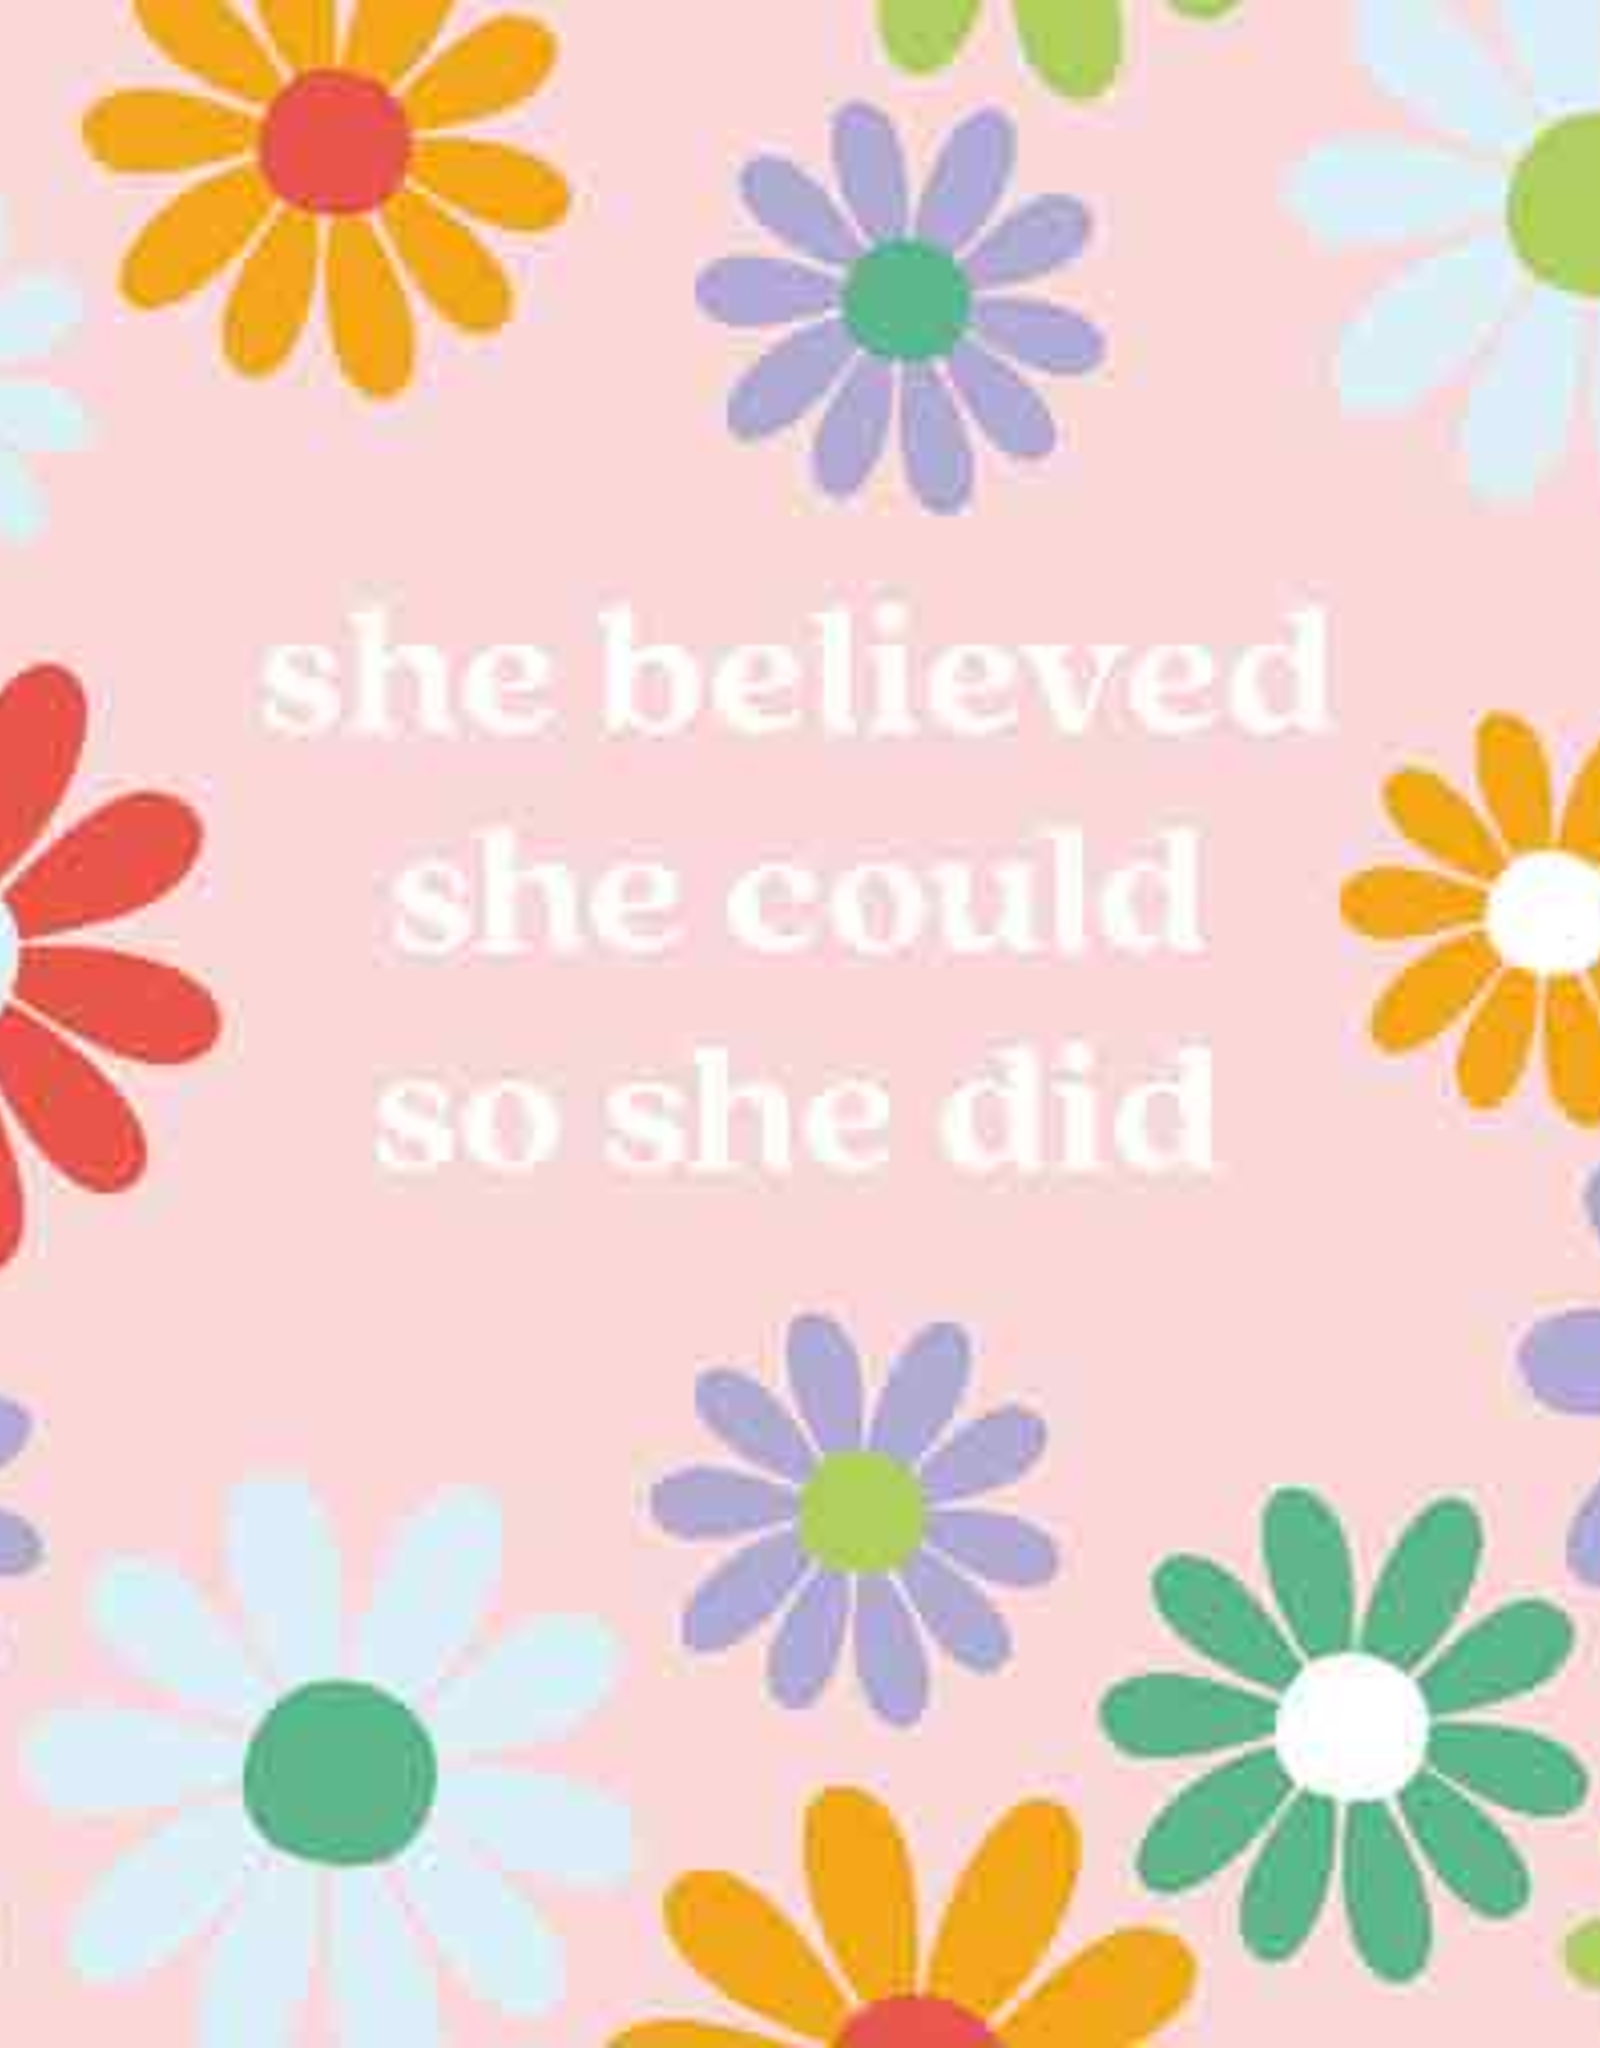 She Believed she could so she did - Wenskaart Liefs